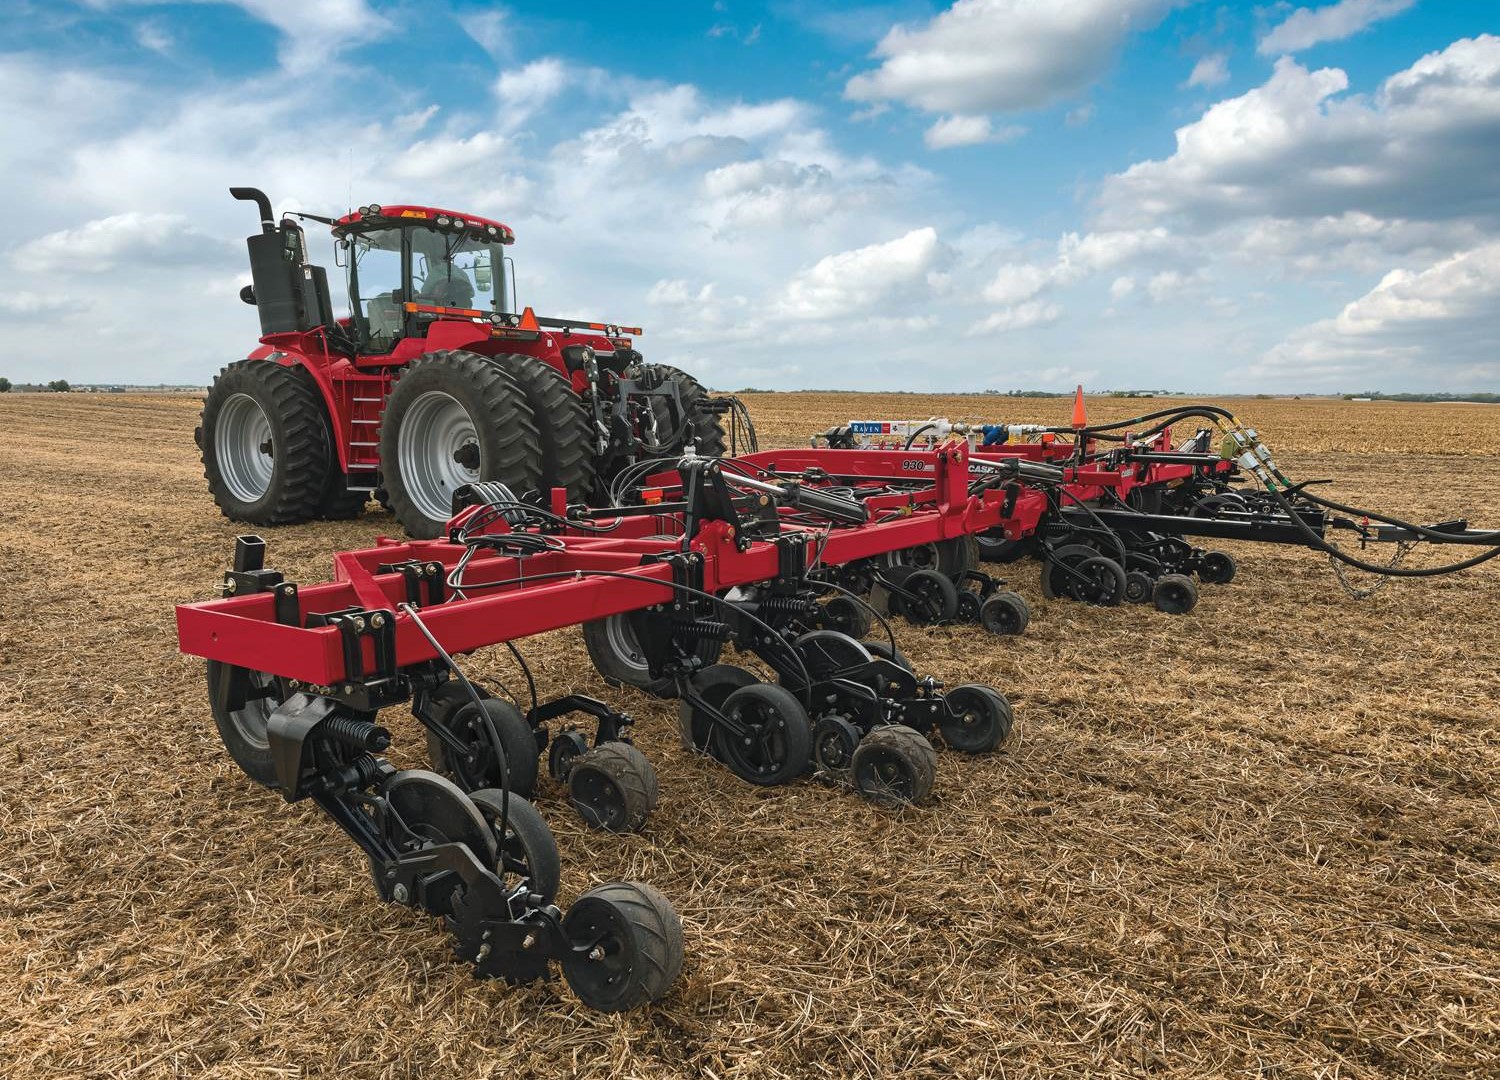 The Nutri-Placer 930 fertilizer applicator with new High-speed Low Disturbance (HSLD)